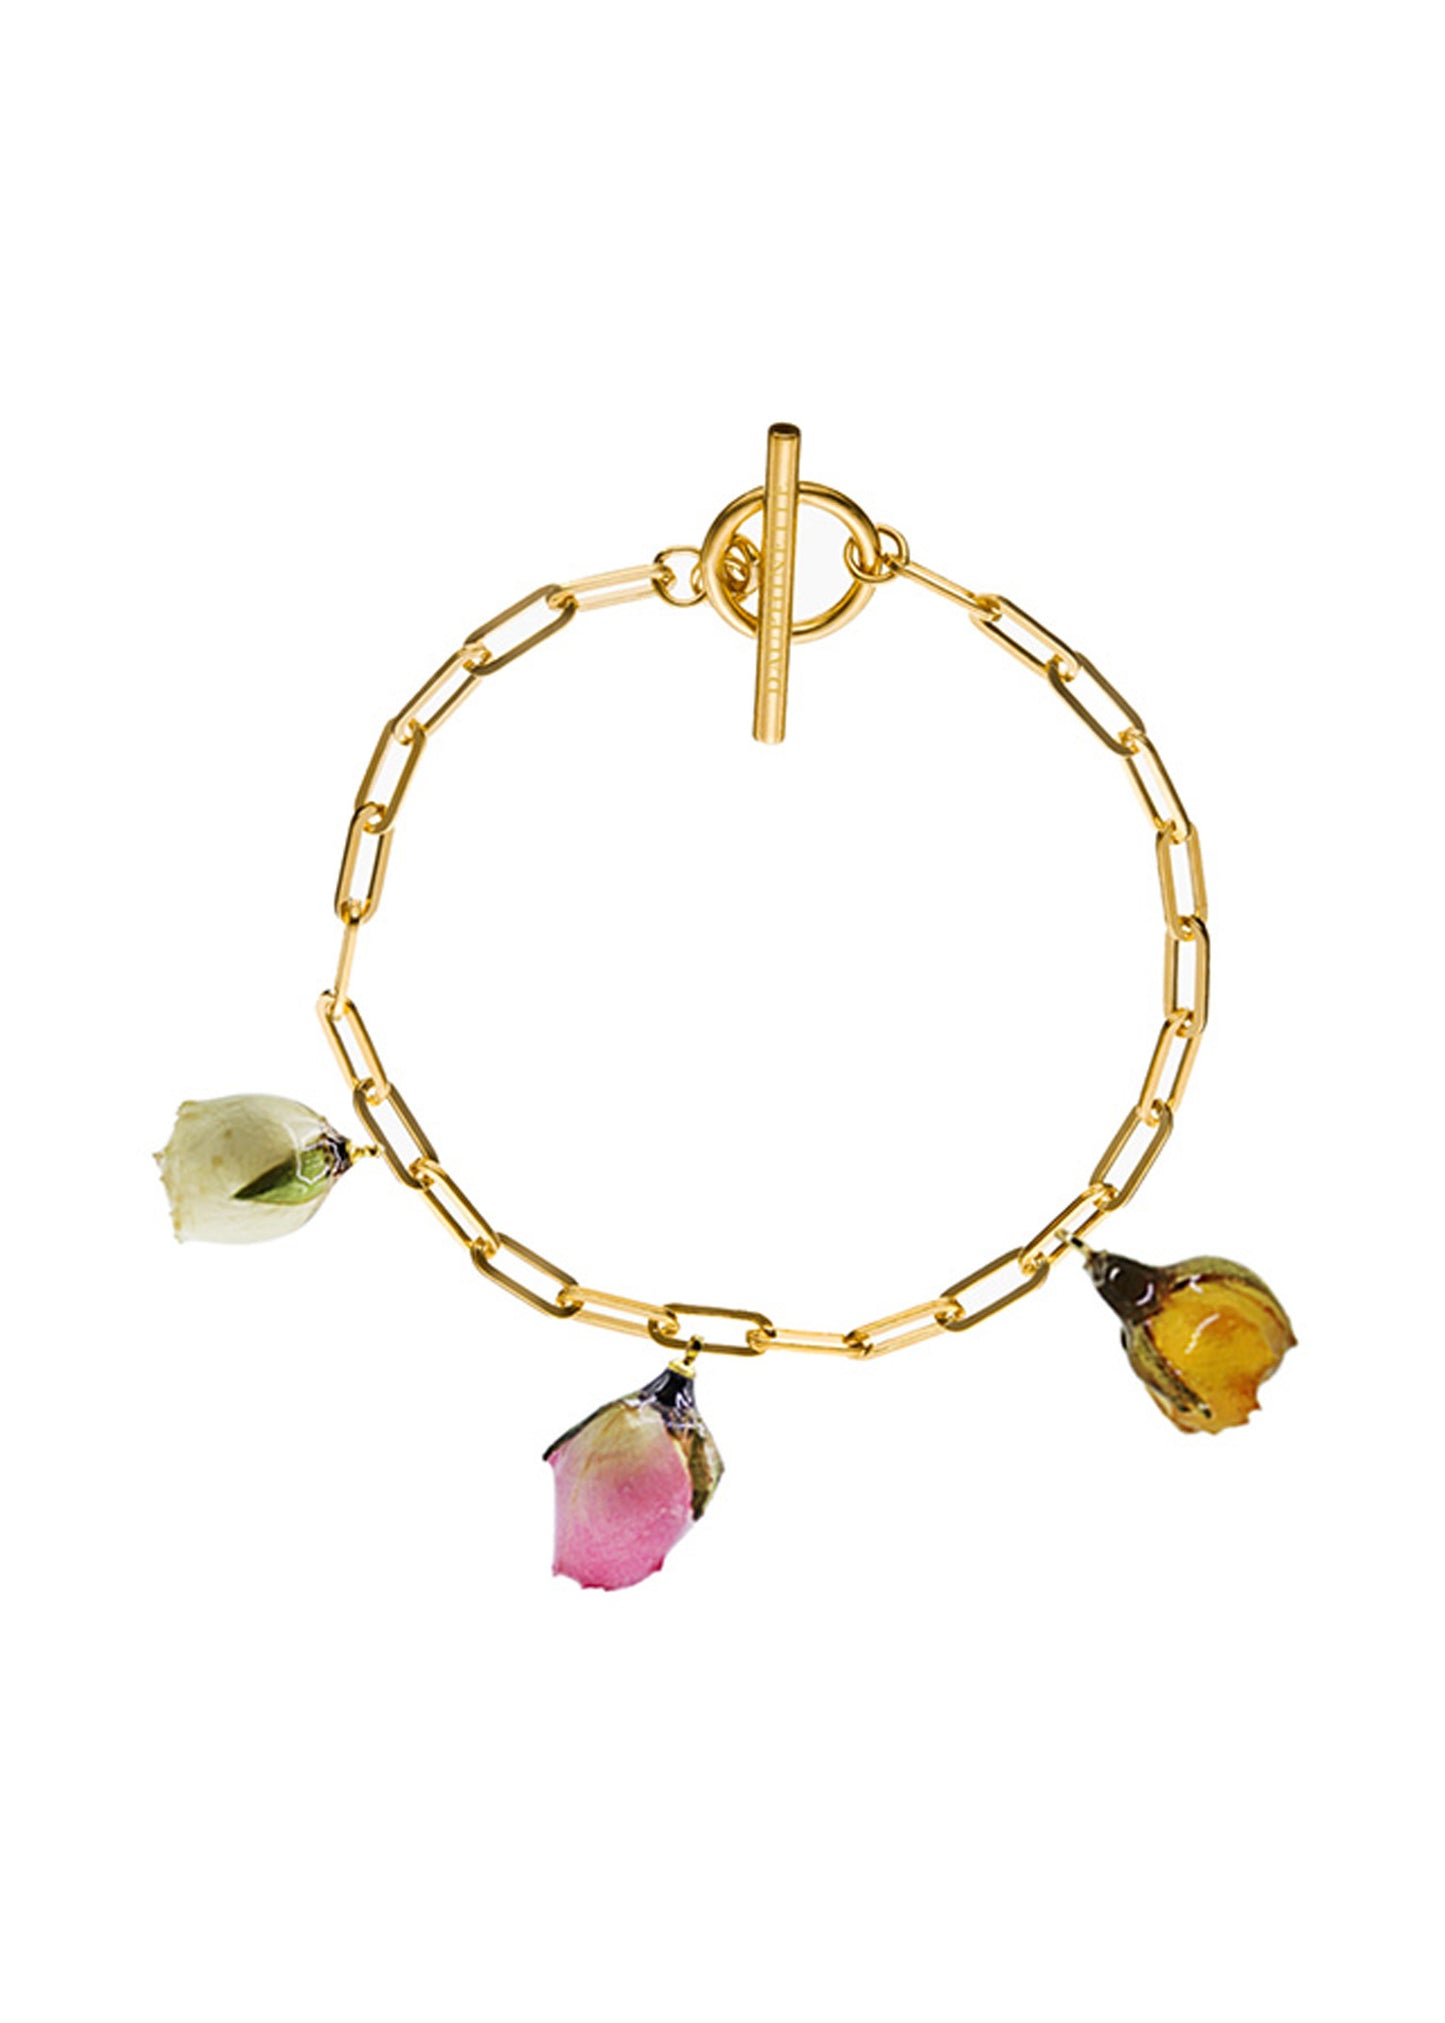 Three preserved rosebuds on a gold chain bracelet.